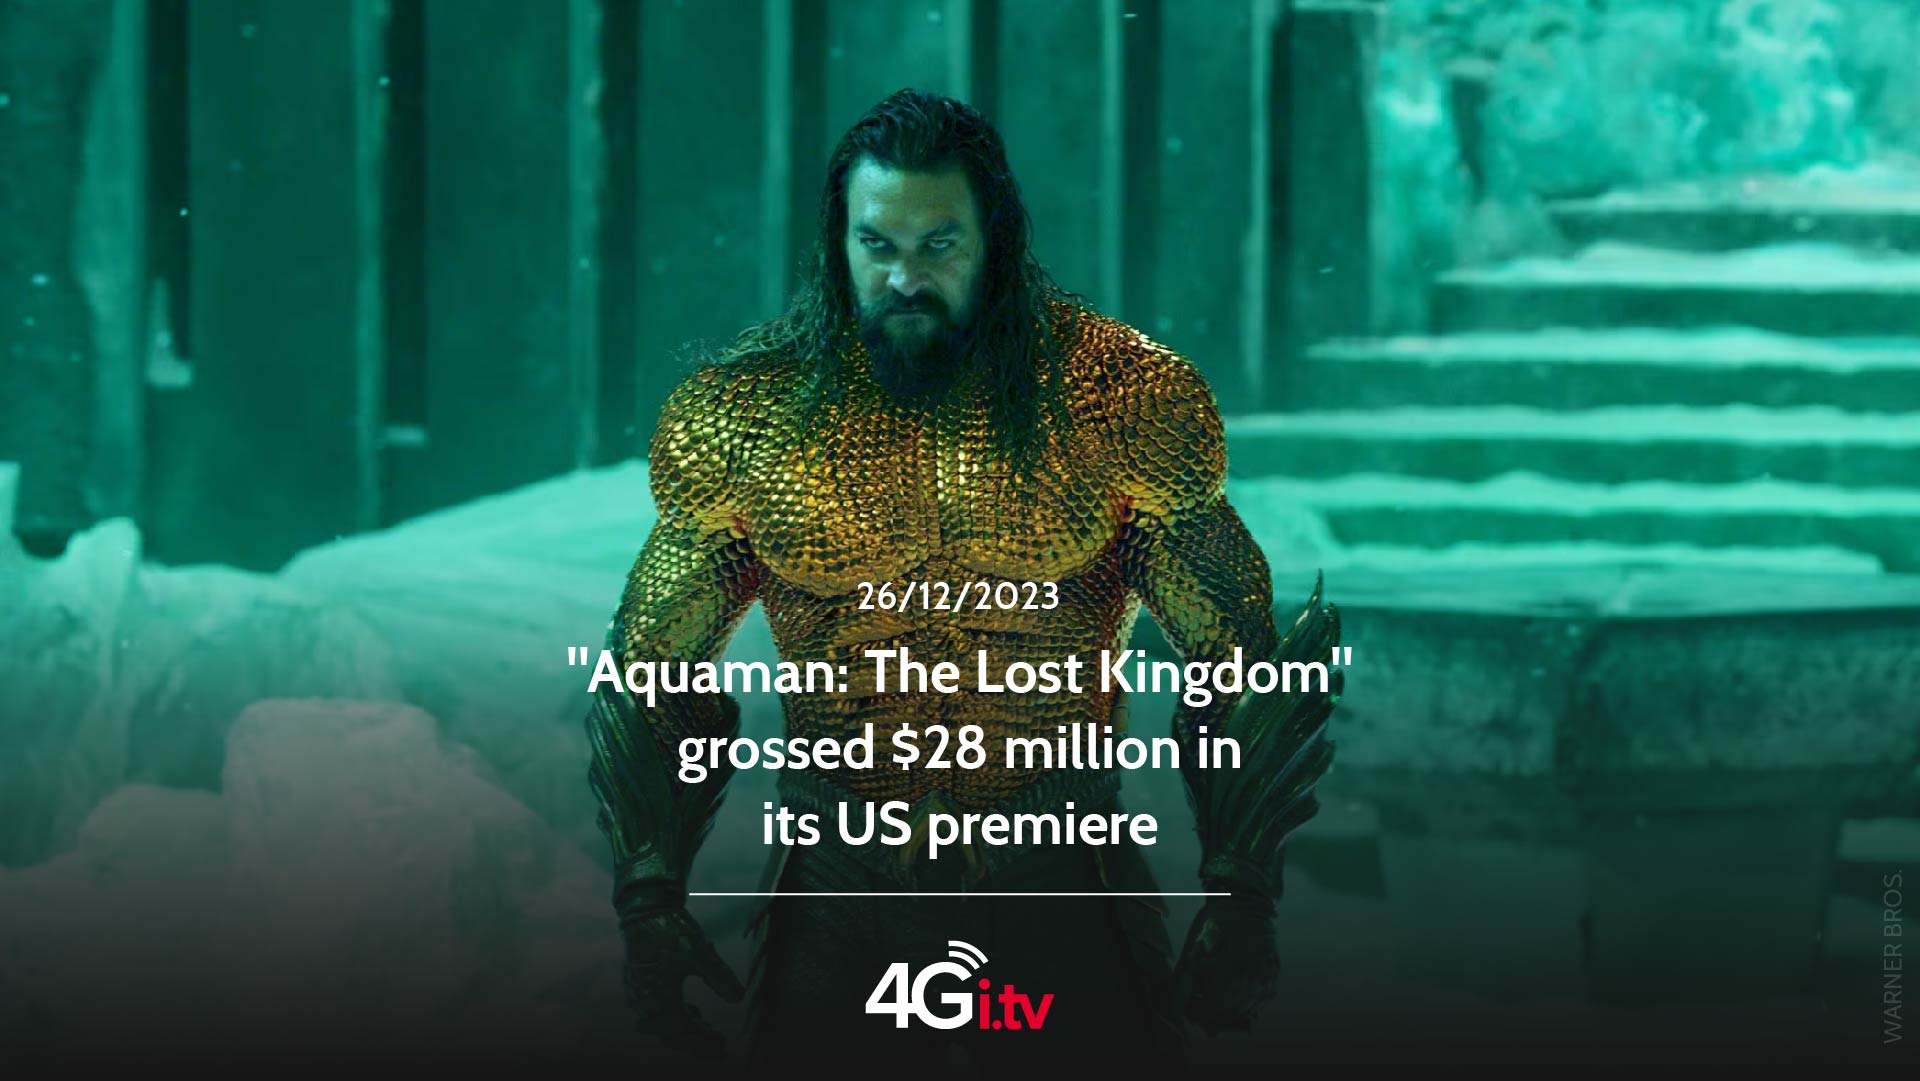 Read more about the article “Aquaman: The Lost Kingdom” grossed $28 million in its US premiere